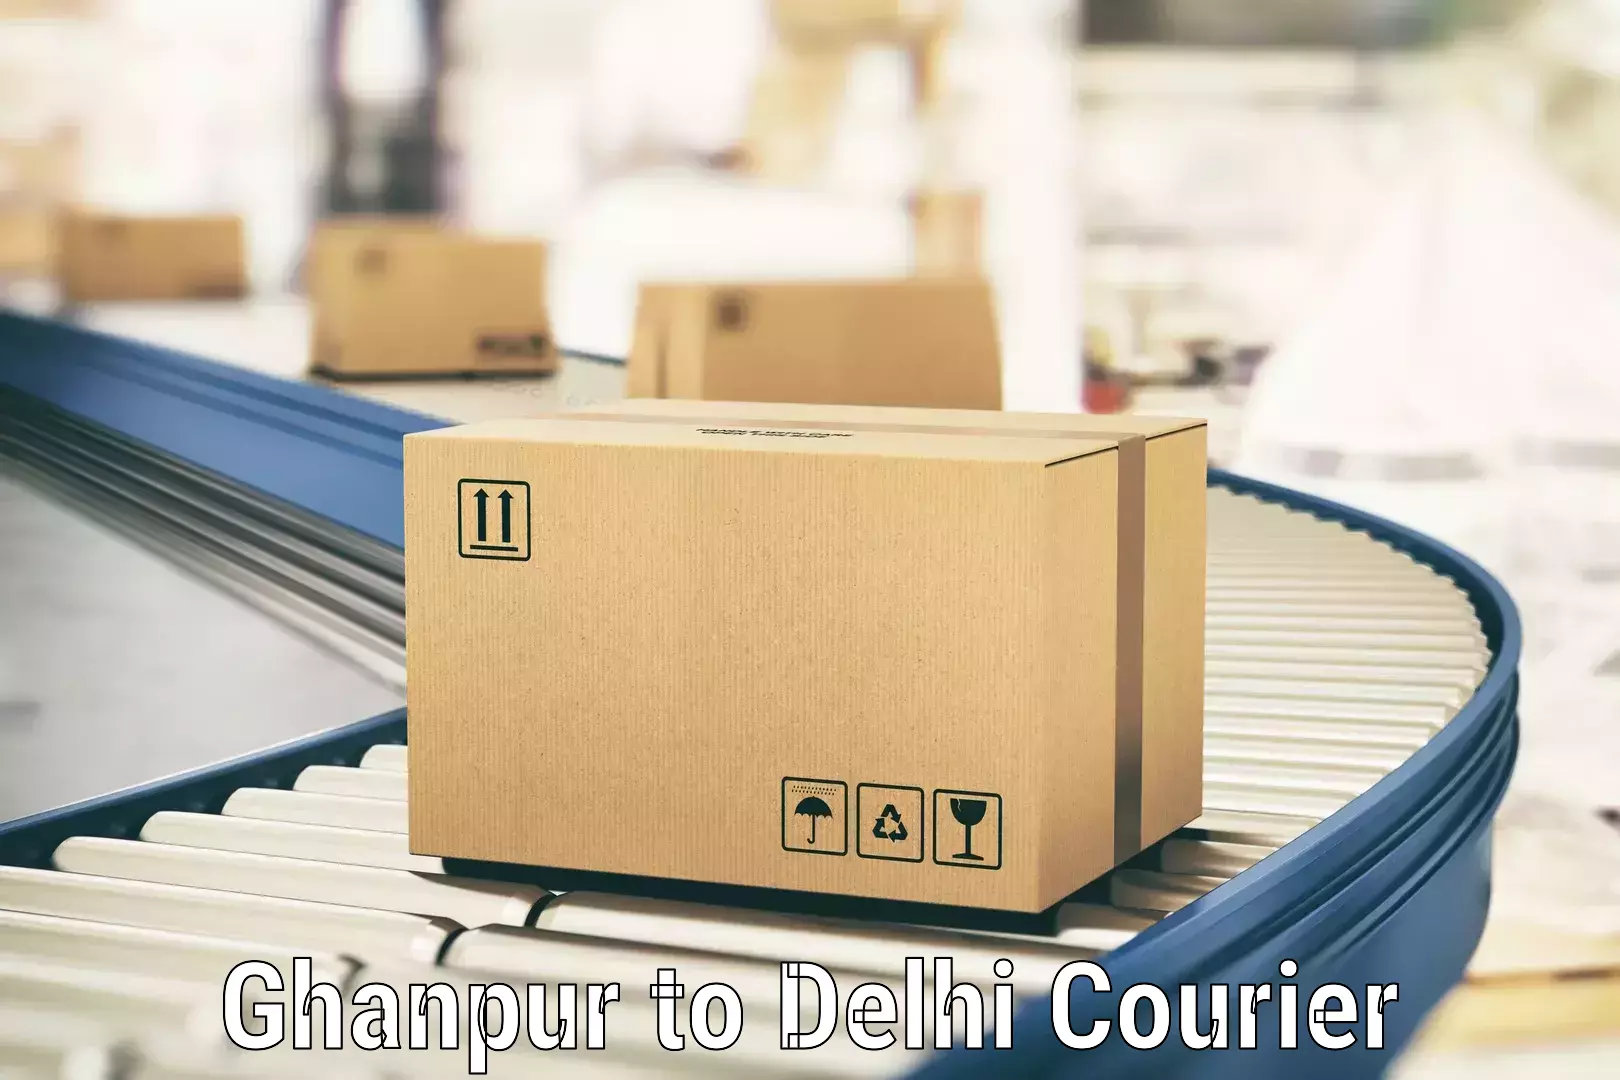 Smart parcel tracking Ghanpur to Burari